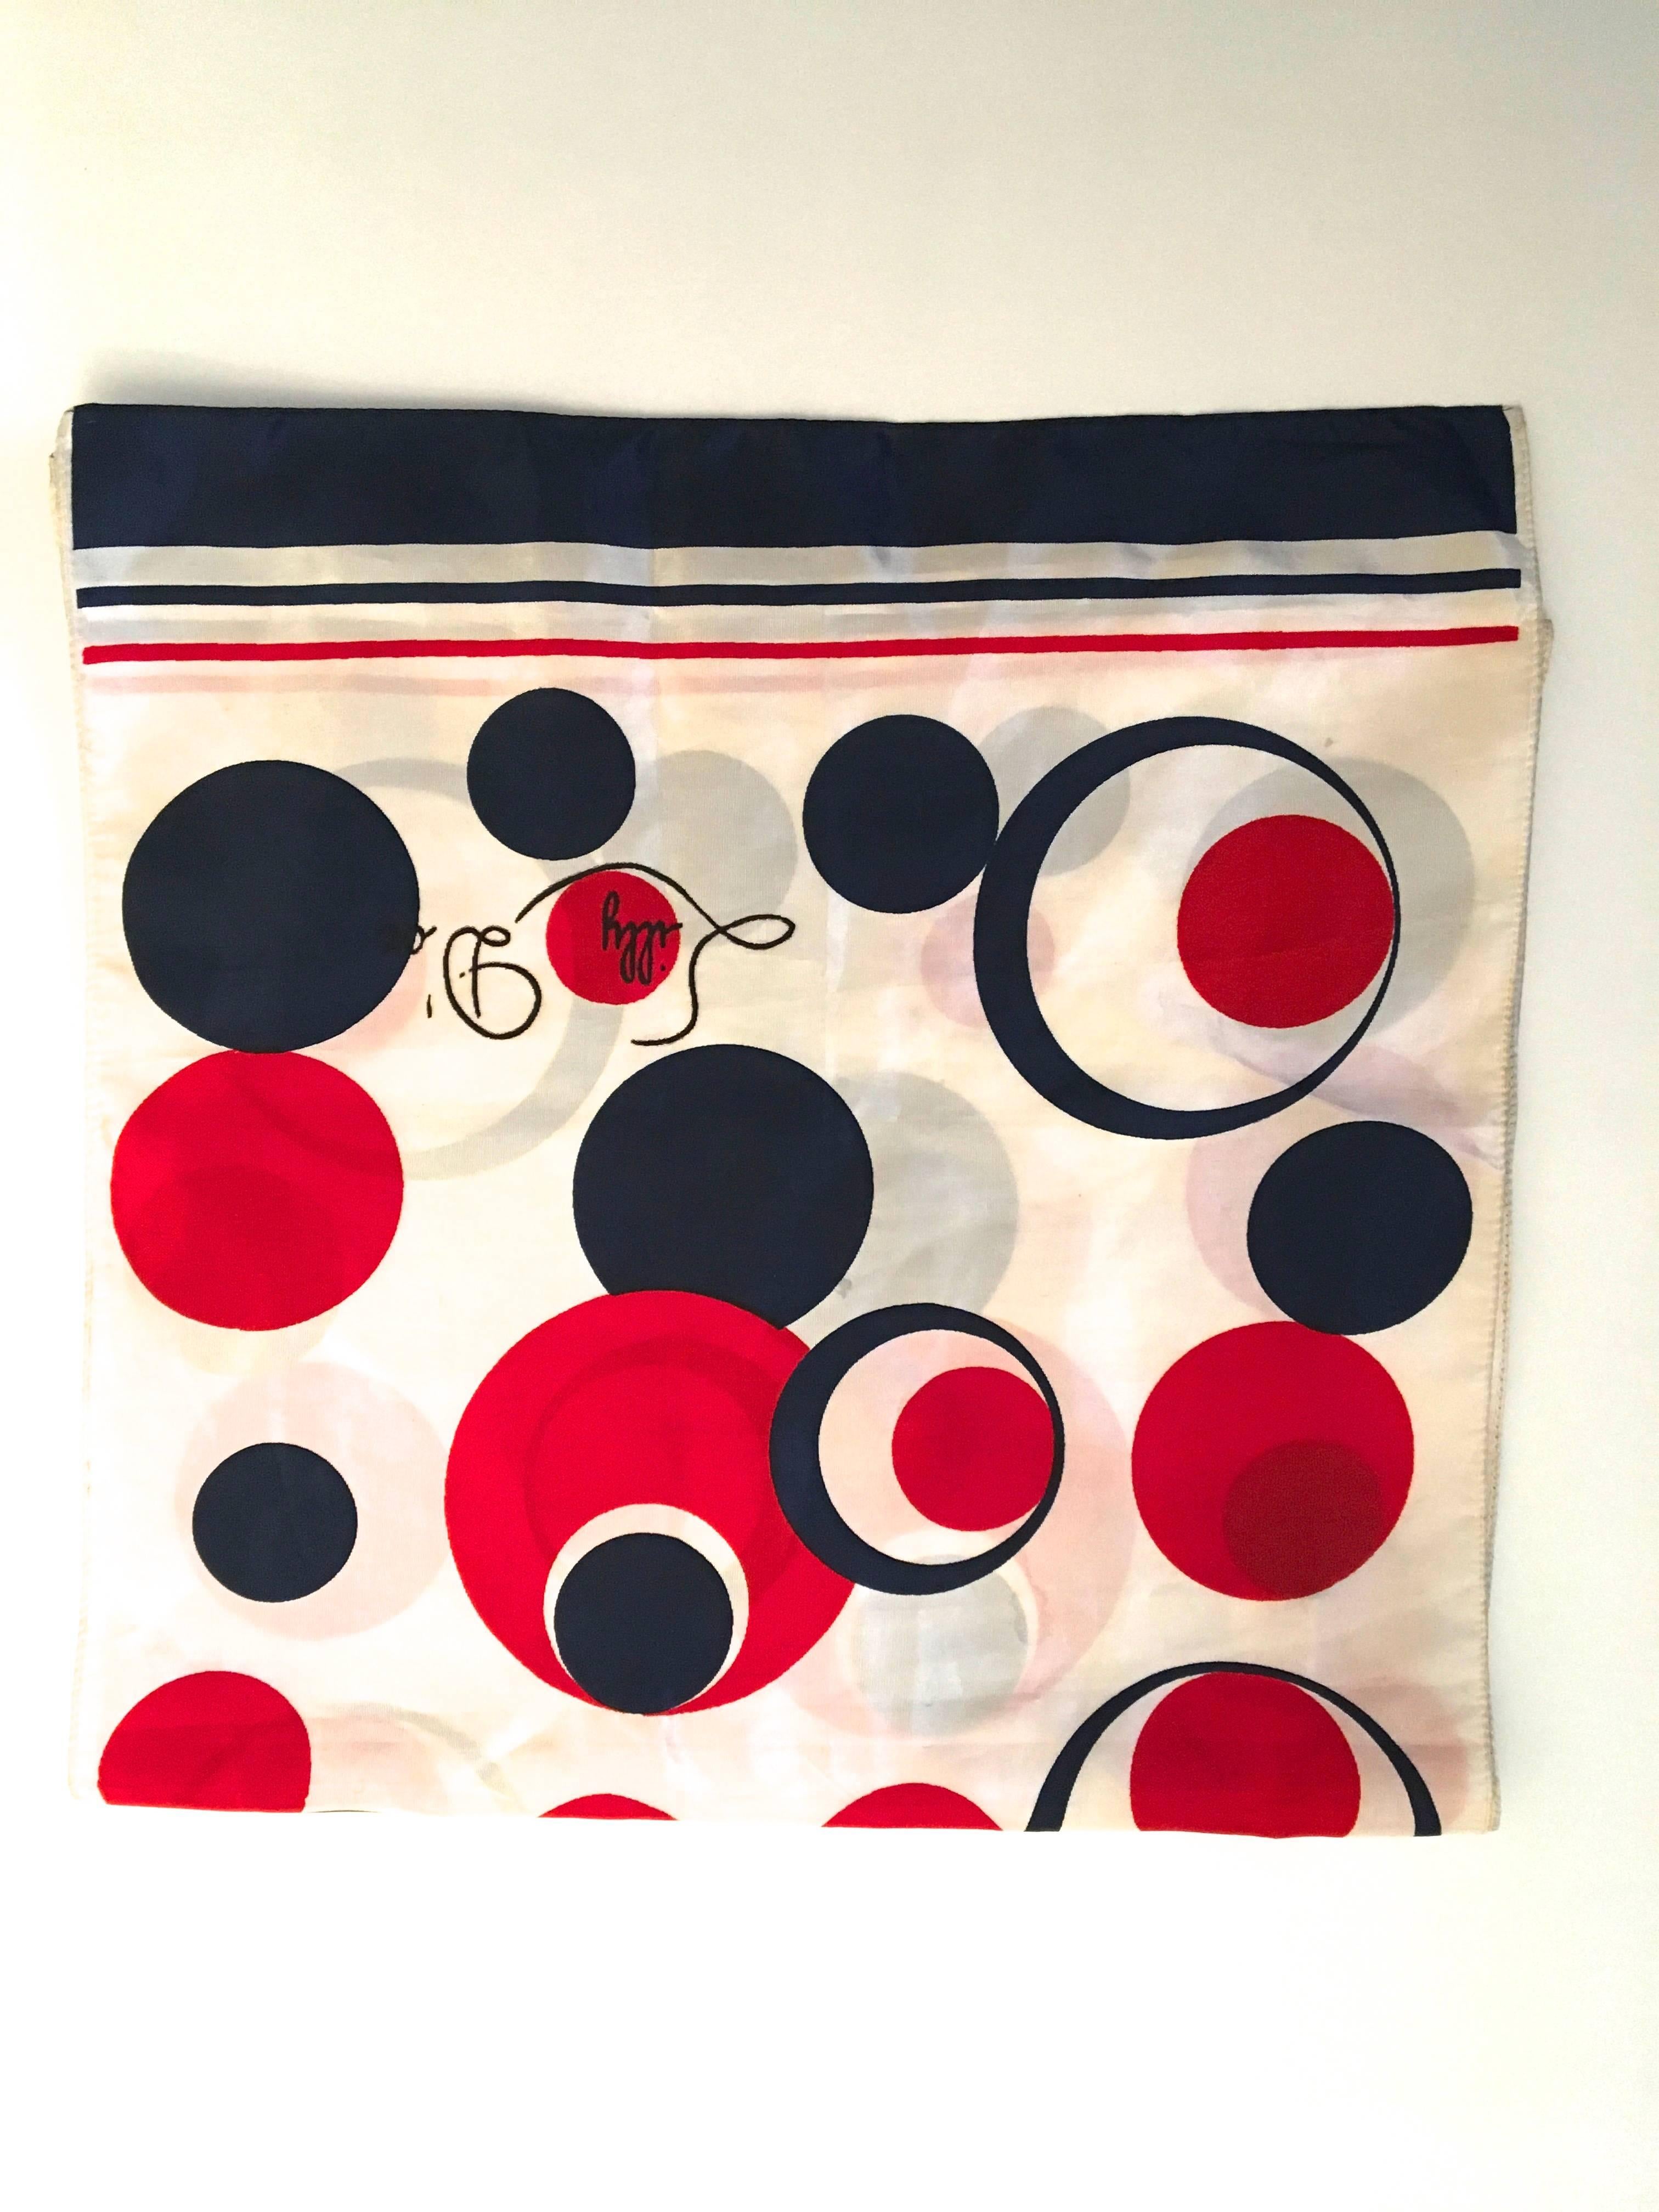 Women's Rare 1960's Lilly D'or Scarf - Mod Geometric Circles